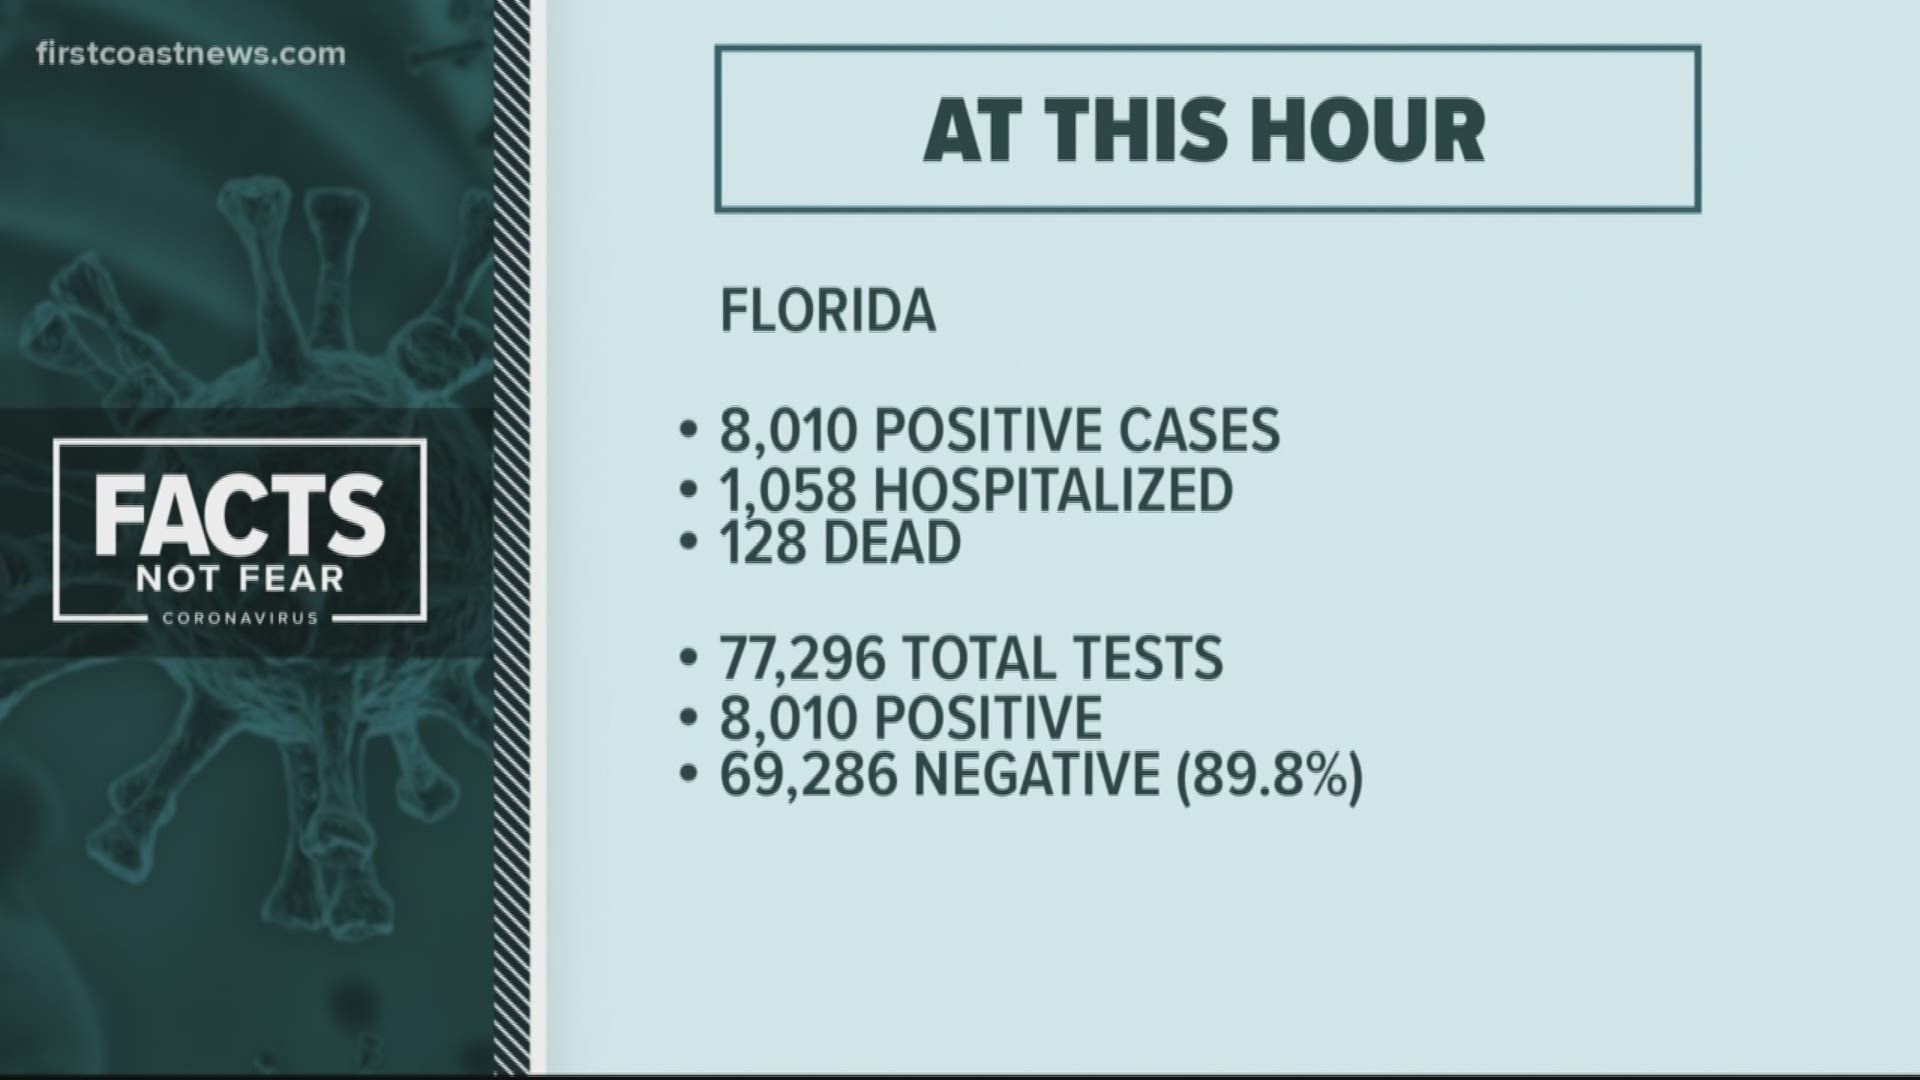 The latest numbers and updates on the coronavirus in Florida and Georgia as of 5 p.m. Thursday.